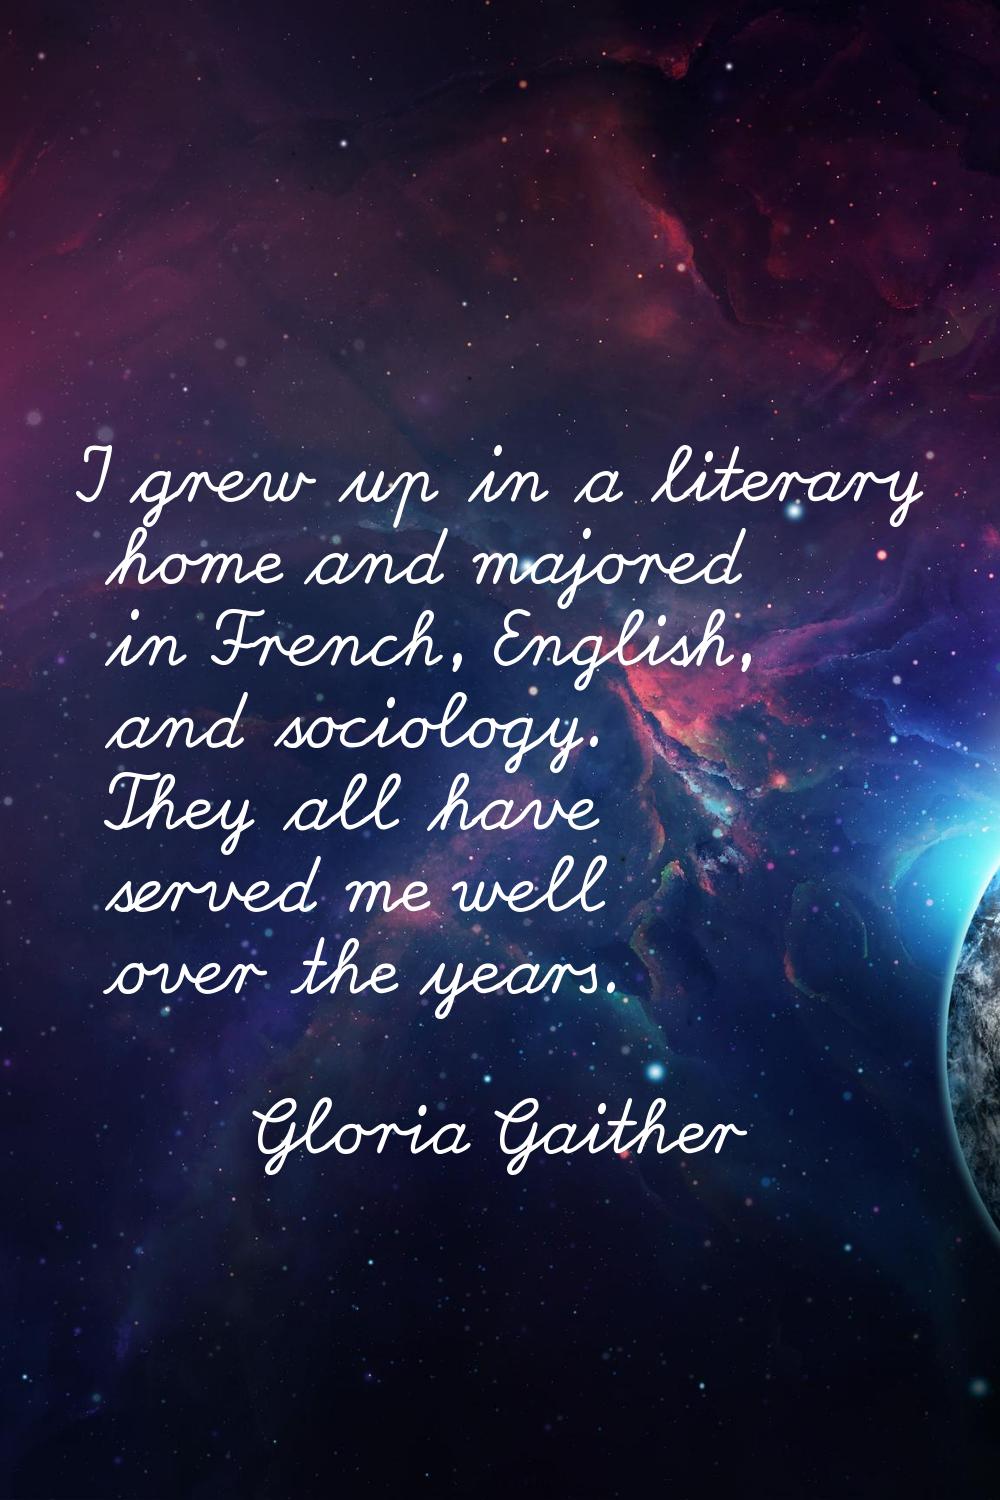 I grew up in a literary home and majored in French, English, and sociology. They all have served me